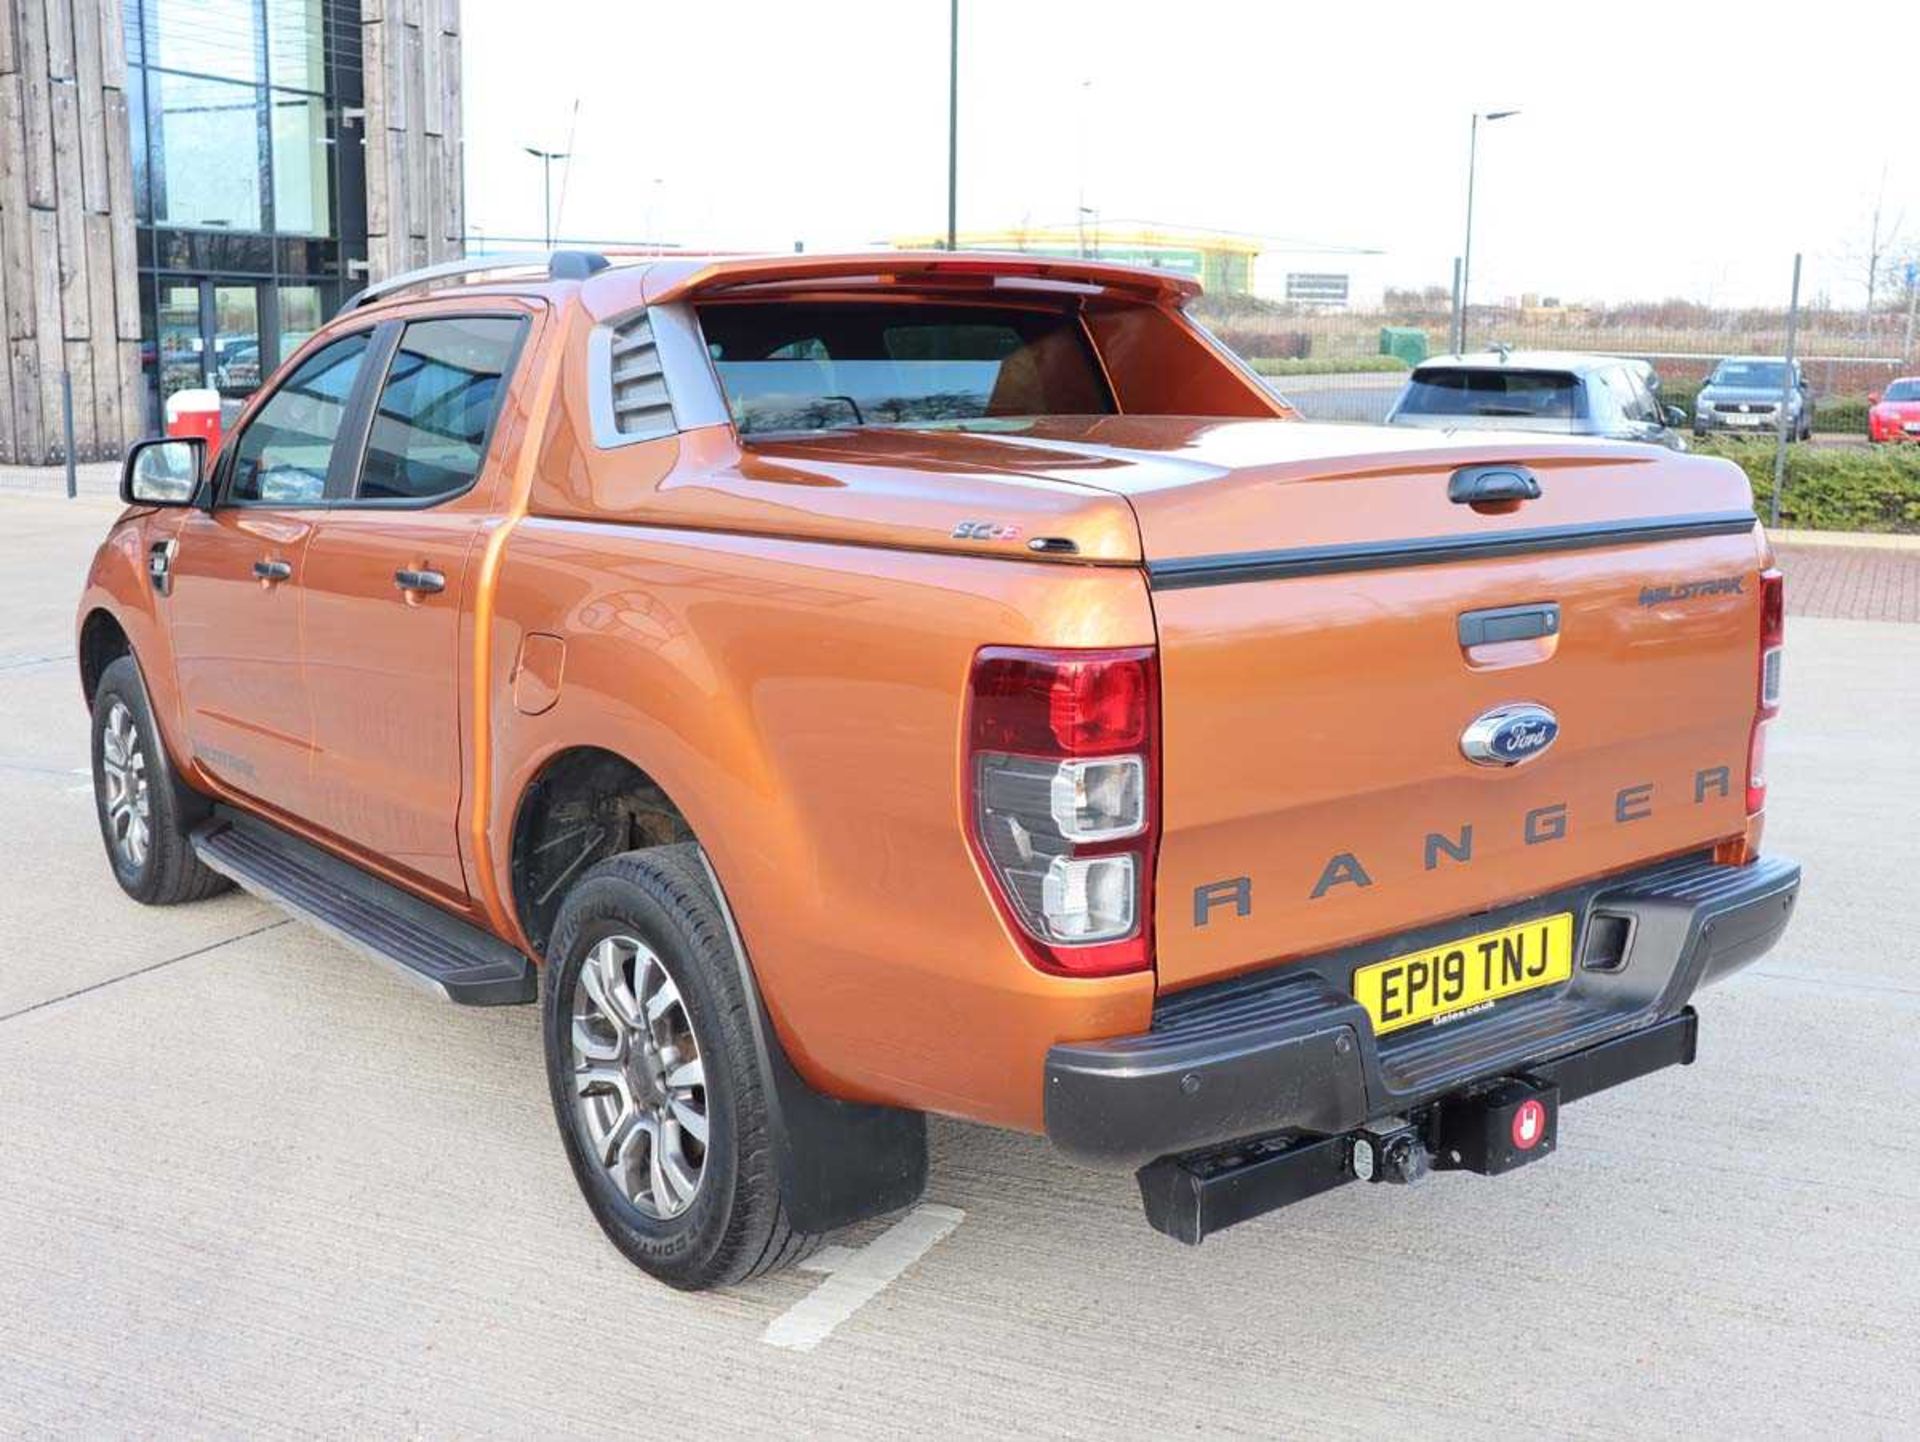 EP19 TNJ (2019) Ford Ranger Wildtrak 4x4 DCB T 3198cc diesel pick up with double cab and 6 speed - Image 8 of 16